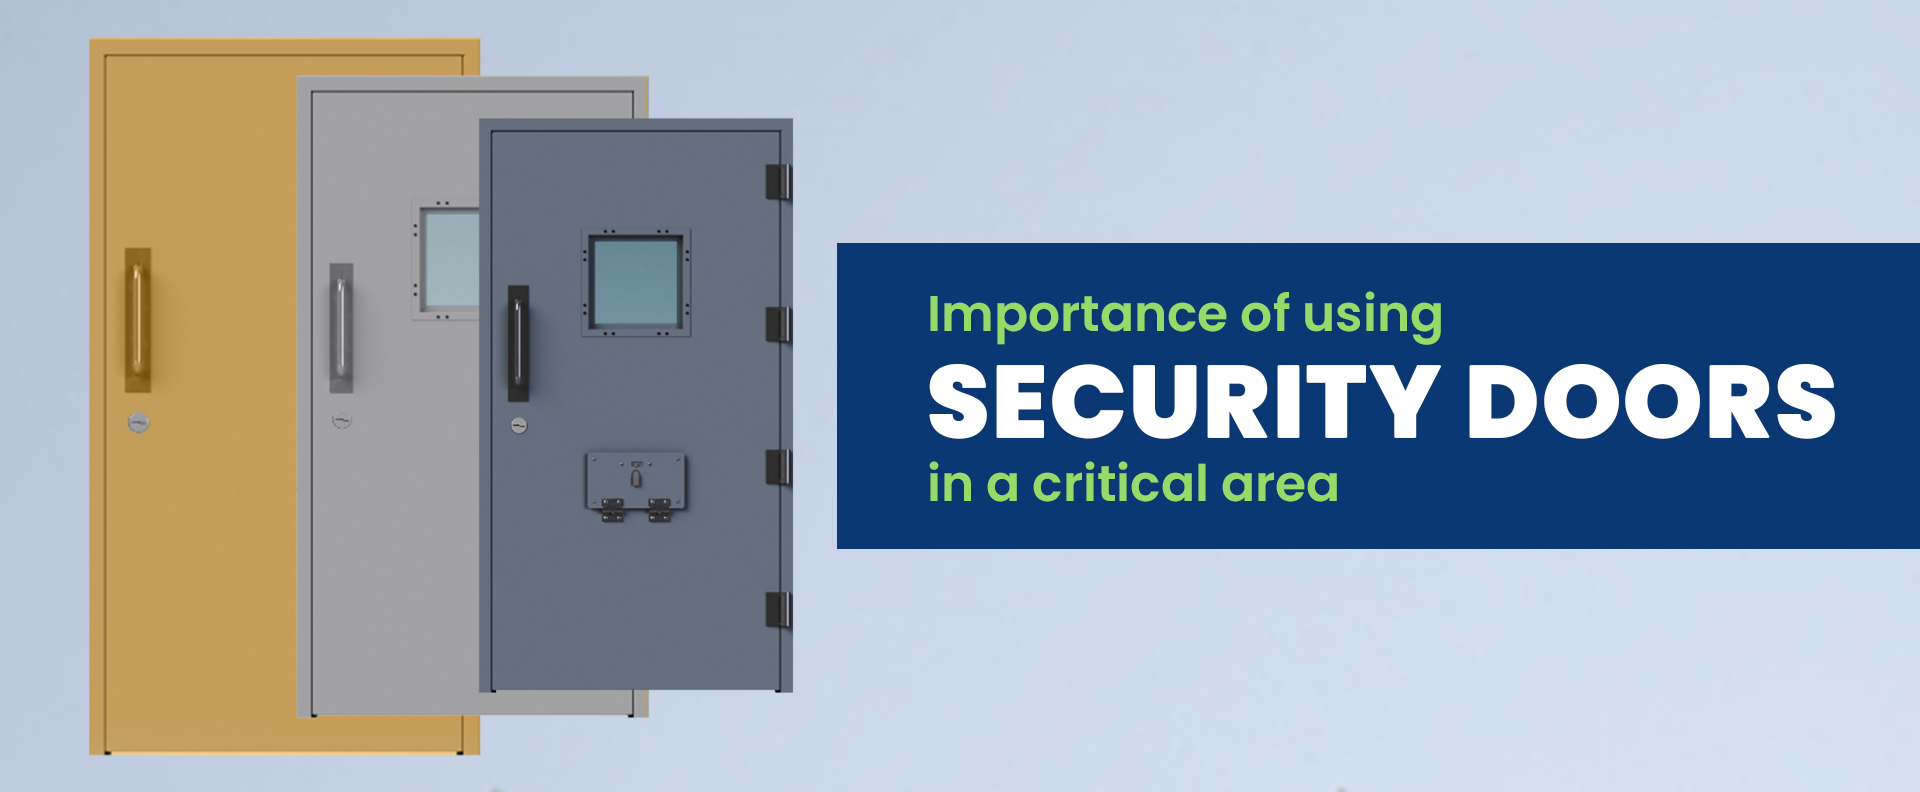 Importance of security doors